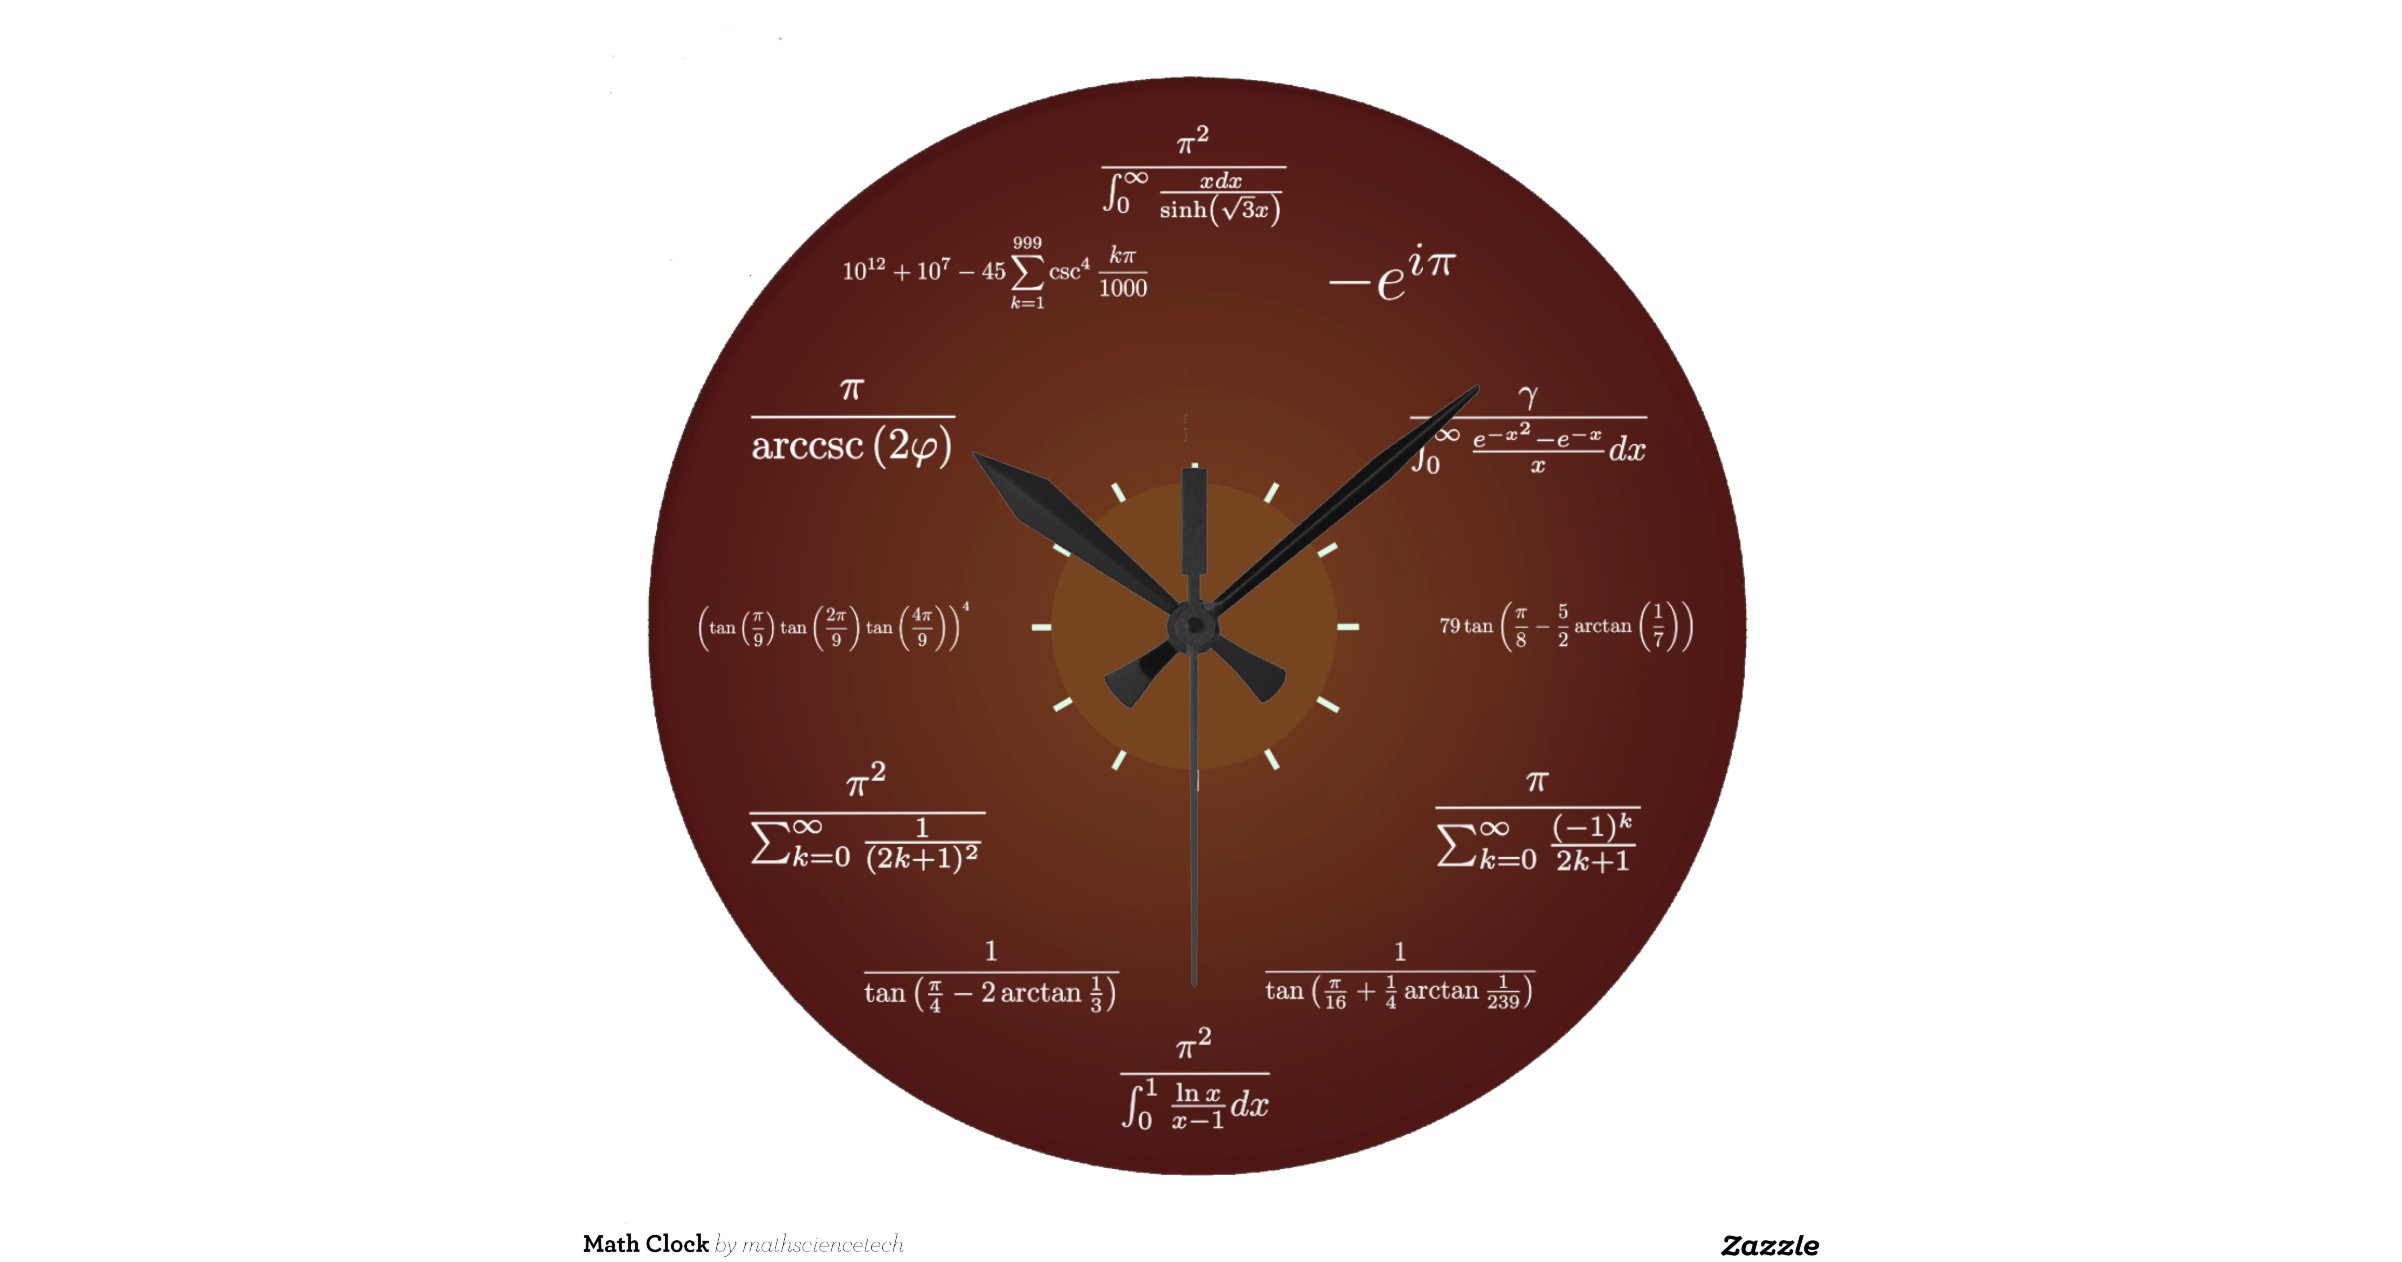 math_clock-rf8b337bd49f64842b4c58dbbd7af0a88_fup13_8byvr_1200.jpg?view